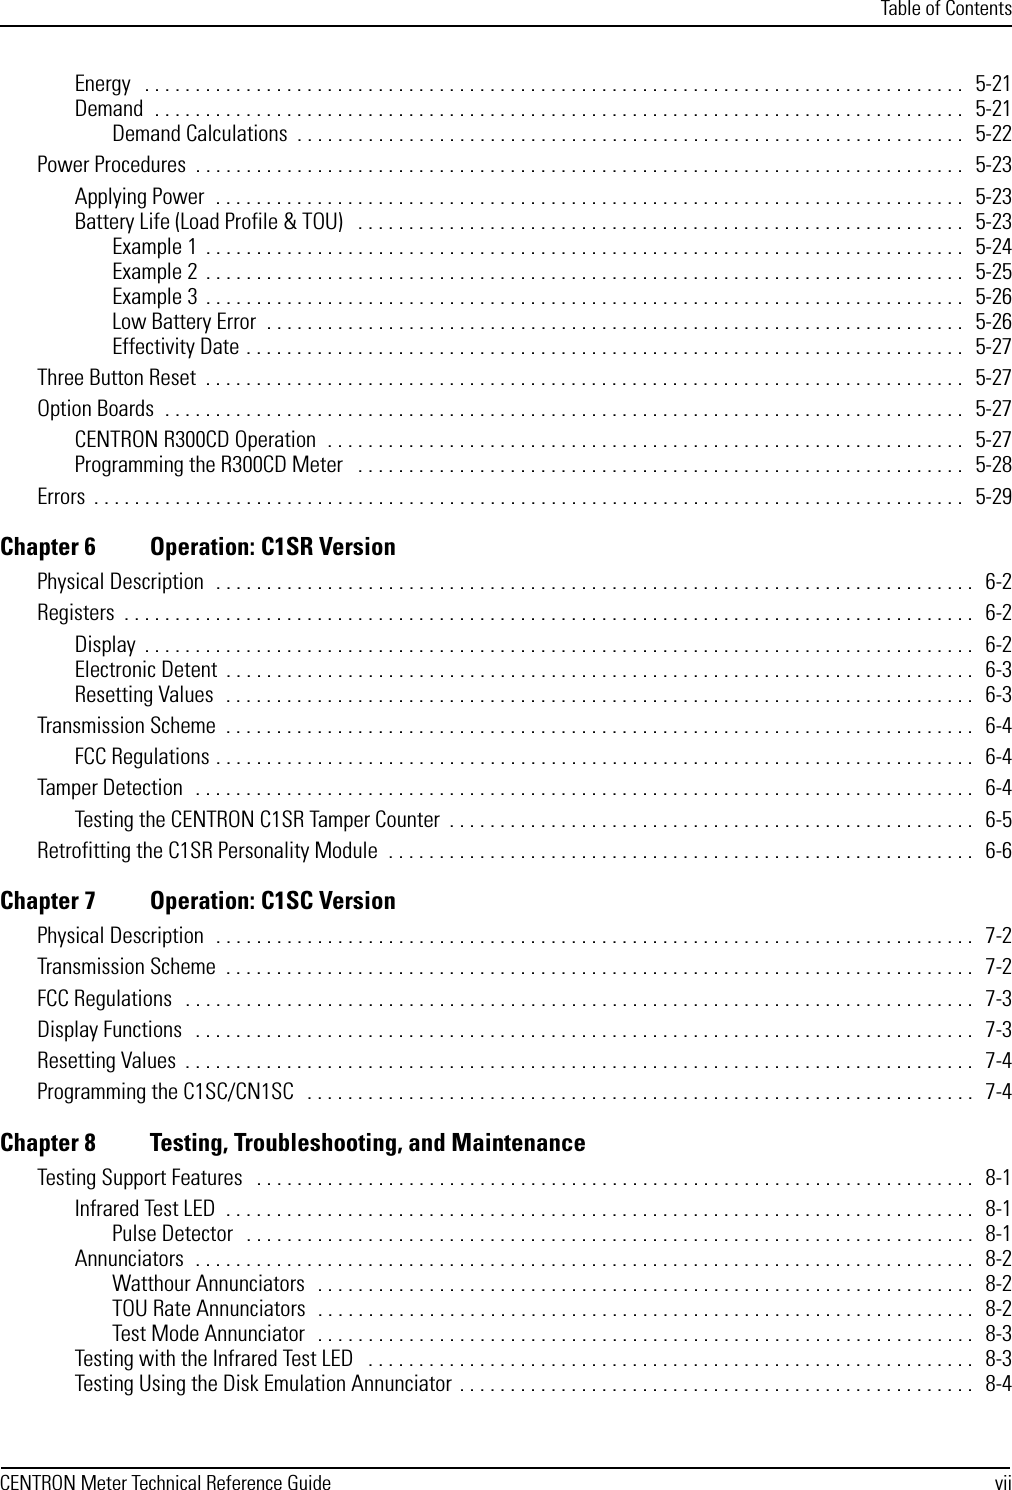 Table of ContentsCENTRON Meter Technical Reference Guide viiEnergy   . . . . . . . . . . . . . . . . . . . . . . . . . . . . . . . . . . . . . . . . . . . . . . . . . . . . . . . . . . . . . . . . . . . . . . . . . . . . . . . . .   5-21Demand  . . . . . . . . . . . . . . . . . . . . . . . . . . . . . . . . . . . . . . . . . . . . . . . . . . . . . . . . . . . . . . . . . . . . . . . . . . . . . . . .   5-21Demand Calculations  . . . . . . . . . . . . . . . . . . . . . . . . . . . . . . . . . . . . . . . . . . . . . . . . . . . . . . . . . . . . . . . . . .   5-22Power Procedures  . . . . . . . . . . . . . . . . . . . . . . . . . . . . . . . . . . . . . . . . . . . . . . . . . . . . . . . . . . . . . . . . . . . . . . . . . . . .   5-23Applying Power  . . . . . . . . . . . . . . . . . . . . . . . . . . . . . . . . . . . . . . . . . . . . . . . . . . . . . . . . . . . . . . . . . . . . . . . . . .   5-23Battery Life (Load Profile &amp; TOU)   . . . . . . . . . . . . . . . . . . . . . . . . . . . . . . . . . . . . . . . . . . . . . . . . . . . . . . . . . . . .   5-23Example 1  . . . . . . . . . . . . . . . . . . . . . . . . . . . . . . . . . . . . . . . . . . . . . . . . . . . . . . . . . . . . . . . . . . . . . . . . . . .   5-24Example 2  . . . . . . . . . . . . . . . . . . . . . . . . . . . . . . . . . . . . . . . . . . . . . . . . . . . . . . . . . . . . . . . . . . . . . . . . . . .   5-25Example 3  . . . . . . . . . . . . . . . . . . . . . . . . . . . . . . . . . . . . . . . . . . . . . . . . . . . . . . . . . . . . . . . . . . . . . . . . . . .   5-26Low Battery Error  . . . . . . . . . . . . . . . . . . . . . . . . . . . . . . . . . . . . . . . . . . . . . . . . . . . . . . . . . . . . . . . . . . . . .   5-26Effectivity Date . . . . . . . . . . . . . . . . . . . . . . . . . . . . . . . . . . . . . . . . . . . . . . . . . . . . . . . . . . . . . . . . . . . . . . .   5-27Three Button Reset  . . . . . . . . . . . . . . . . . . . . . . . . . . . . . . . . . . . . . . . . . . . . . . . . . . . . . . . . . . . . . . . . . . . . . . . . . . .  5-27Option Boards  . . . . . . . . . . . . . . . . . . . . . . . . . . . . . . . . . . . . . . . . . . . . . . . . . . . . . . . . . . . . . . . . . . . . . . . . . . . . . . .   5-27CENTRON R300CD Operation  . . . . . . . . . . . . . . . . . . . . . . . . . . . . . . . . . . . . . . . . . . . . . . . . . . . . . . . . . . . . . . .   5-27Programming the R300CD Meter   . . . . . . . . . . . . . . . . . . . . . . . . . . . . . . . . . . . . . . . . . . . . . . . . . . . . . . . . . . . .   5-28Errors  . . . . . . . . . . . . . . . . . . . . . . . . . . . . . . . . . . . . . . . . . . . . . . . . . . . . . . . . . . . . . . . . . . . . . . . . . . . . . . . . . . . . . .   5-29Chapter 6 Operation: C1SR VersionPhysical Description  . . . . . . . . . . . . . . . . . . . . . . . . . . . . . . . . . . . . . . . . . . . . . . . . . . . . . . . . . . . . . . . . . . . . . . . . . . .   6-2Registers  . . . . . . . . . . . . . . . . . . . . . . . . . . . . . . . . . . . . . . . . . . . . . . . . . . . . . . . . . . . . . . . . . . . . . . . . . . . . . . . . . . . .   6-2Display  . . . . . . . . . . . . . . . . . . . . . . . . . . . . . . . . . . . . . . . . . . . . . . . . . . . . . . . . . . . . . . . . . . . . . . . . . . . . . . . . . .   6-2Electronic Detent  . . . . . . . . . . . . . . . . . . . . . . . . . . . . . . . . . . . . . . . . . . . . . . . . . . . . . . . . . . . . . . . . . . . . . . . . . .   6-3Resetting Values  . . . . . . . . . . . . . . . . . . . . . . . . . . . . . . . . . . . . . . . . . . . . . . . . . . . . . . . . . . . . . . . . . . . . . . . . . .   6-3Transmission Scheme  . . . . . . . . . . . . . . . . . . . . . . . . . . . . . . . . . . . . . . . . . . . . . . . . . . . . . . . . . . . . . . . . . . . . . . . . . .   6-4FCC Regulations . . . . . . . . . . . . . . . . . . . . . . . . . . . . . . . . . . . . . . . . . . . . . . . . . . . . . . . . . . . . . . . . . . . . . . . . . . .   6-4Tamper Detection  . . . . . . . . . . . . . . . . . . . . . . . . . . . . . . . . . . . . . . . . . . . . . . . . . . . . . . . . . . . . . . . . . . . . . . . . . . . . .   6-4Testing the CENTRON C1SR Tamper Counter  . . . . . . . . . . . . . . . . . . . . . . . . . . . . . . . . . . . . . . . . . . . . . . . . . . . .   6-5Retrofitting the C1SR Personality Module  . . . . . . . . . . . . . . . . . . . . . . . . . . . . . . . . . . . . . . . . . . . . . . . . . . . . . . . . . .   6-6Chapter 7 Operation: C1SC VersionPhysical Description  . . . . . . . . . . . . . . . . . . . . . . . . . . . . . . . . . . . . . . . . . . . . . . . . . . . . . . . . . . . . . . . . . . . . . . . . . . .   7-2Transmission Scheme  . . . . . . . . . . . . . . . . . . . . . . . . . . . . . . . . . . . . . . . . . . . . . . . . . . . . . . . . . . . . . . . . . . . . . . . . . .   7-2FCC Regulations   . . . . . . . . . . . . . . . . . . . . . . . . . . . . . . . . . . . . . . . . . . . . . . . . . . . . . . . . . . . . . . . . . . . . . . . . . . . . . .   7-3Display Functions   . . . . . . . . . . . . . . . . . . . . . . . . . . . . . . . . . . . . . . . . . . . . . . . . . . . . . . . . . . . . . . . . . . . . . . . . . . . . .   7-3Resetting Values  . . . . . . . . . . . . . . . . . . . . . . . . . . . . . . . . . . . . . . . . . . . . . . . . . . . . . . . . . . . . . . . . . . . . . . . . . . . . . .   7-4Programming the C1SC/CN1SC   . . . . . . . . . . . . . . . . . . . . . . . . . . . . . . . . . . . . . . . . . . . . . . . . . . . . . . . . . . . . . . . . . .  7-4Chapter 8 Testing, Troubleshooting, and MaintenanceTesting Support Features   . . . . . . . . . . . . . . . . . . . . . . . . . . . . . . . . . . . . . . . . . . . . . . . . . . . . . . . . . . . . . . . . . . . . . . .   8-1Infrared Test LED  . . . . . . . . . . . . . . . . . . . . . . . . . . . . . . . . . . . . . . . . . . . . . . . . . . . . . . . . . . . . . . . . . . . . . . . . . .   8-1Pulse Detector   . . . . . . . . . . . . . . . . . . . . . . . . . . . . . . . . . . . . . . . . . . . . . . . . . . . . . . . . . . . . . . . . . . . . . . . .   8-1Annunciators  . . . . . . . . . . . . . . . . . . . . . . . . . . . . . . . . . . . . . . . . . . . . . . . . . . . . . . . . . . . . . . . . . . . . . . . . . . . . .   8-2Watthour Annunciators   . . . . . . . . . . . . . . . . . . . . . . . . . . . . . . . . . . . . . . . . . . . . . . . . . . . . . . . . . . . . . . . . .   8-2TOU Rate Annunciators  . . . . . . . . . . . . . . . . . . . . . . . . . . . . . . . . . . . . . . . . . . . . . . . . . . . . . . . . . . . . . . . . .   8-2Test Mode Annunciator  . . . . . . . . . . . . . . . . . . . . . . . . . . . . . . . . . . . . . . . . . . . . . . . . . . . . . . . . . . . . . . . . .   8-3Testing with the Infrared Test LED   . . . . . . . . . . . . . . . . . . . . . . . . . . . . . . . . . . . . . . . . . . . . . . . . . . . . . . . . . . . .   8-3Testing Using the Disk Emulation Annunciator  . . . . . . . . . . . . . . . . . . . . . . . . . . . . . . . . . . . . . . . . . . . . . . . . . . .   8-4